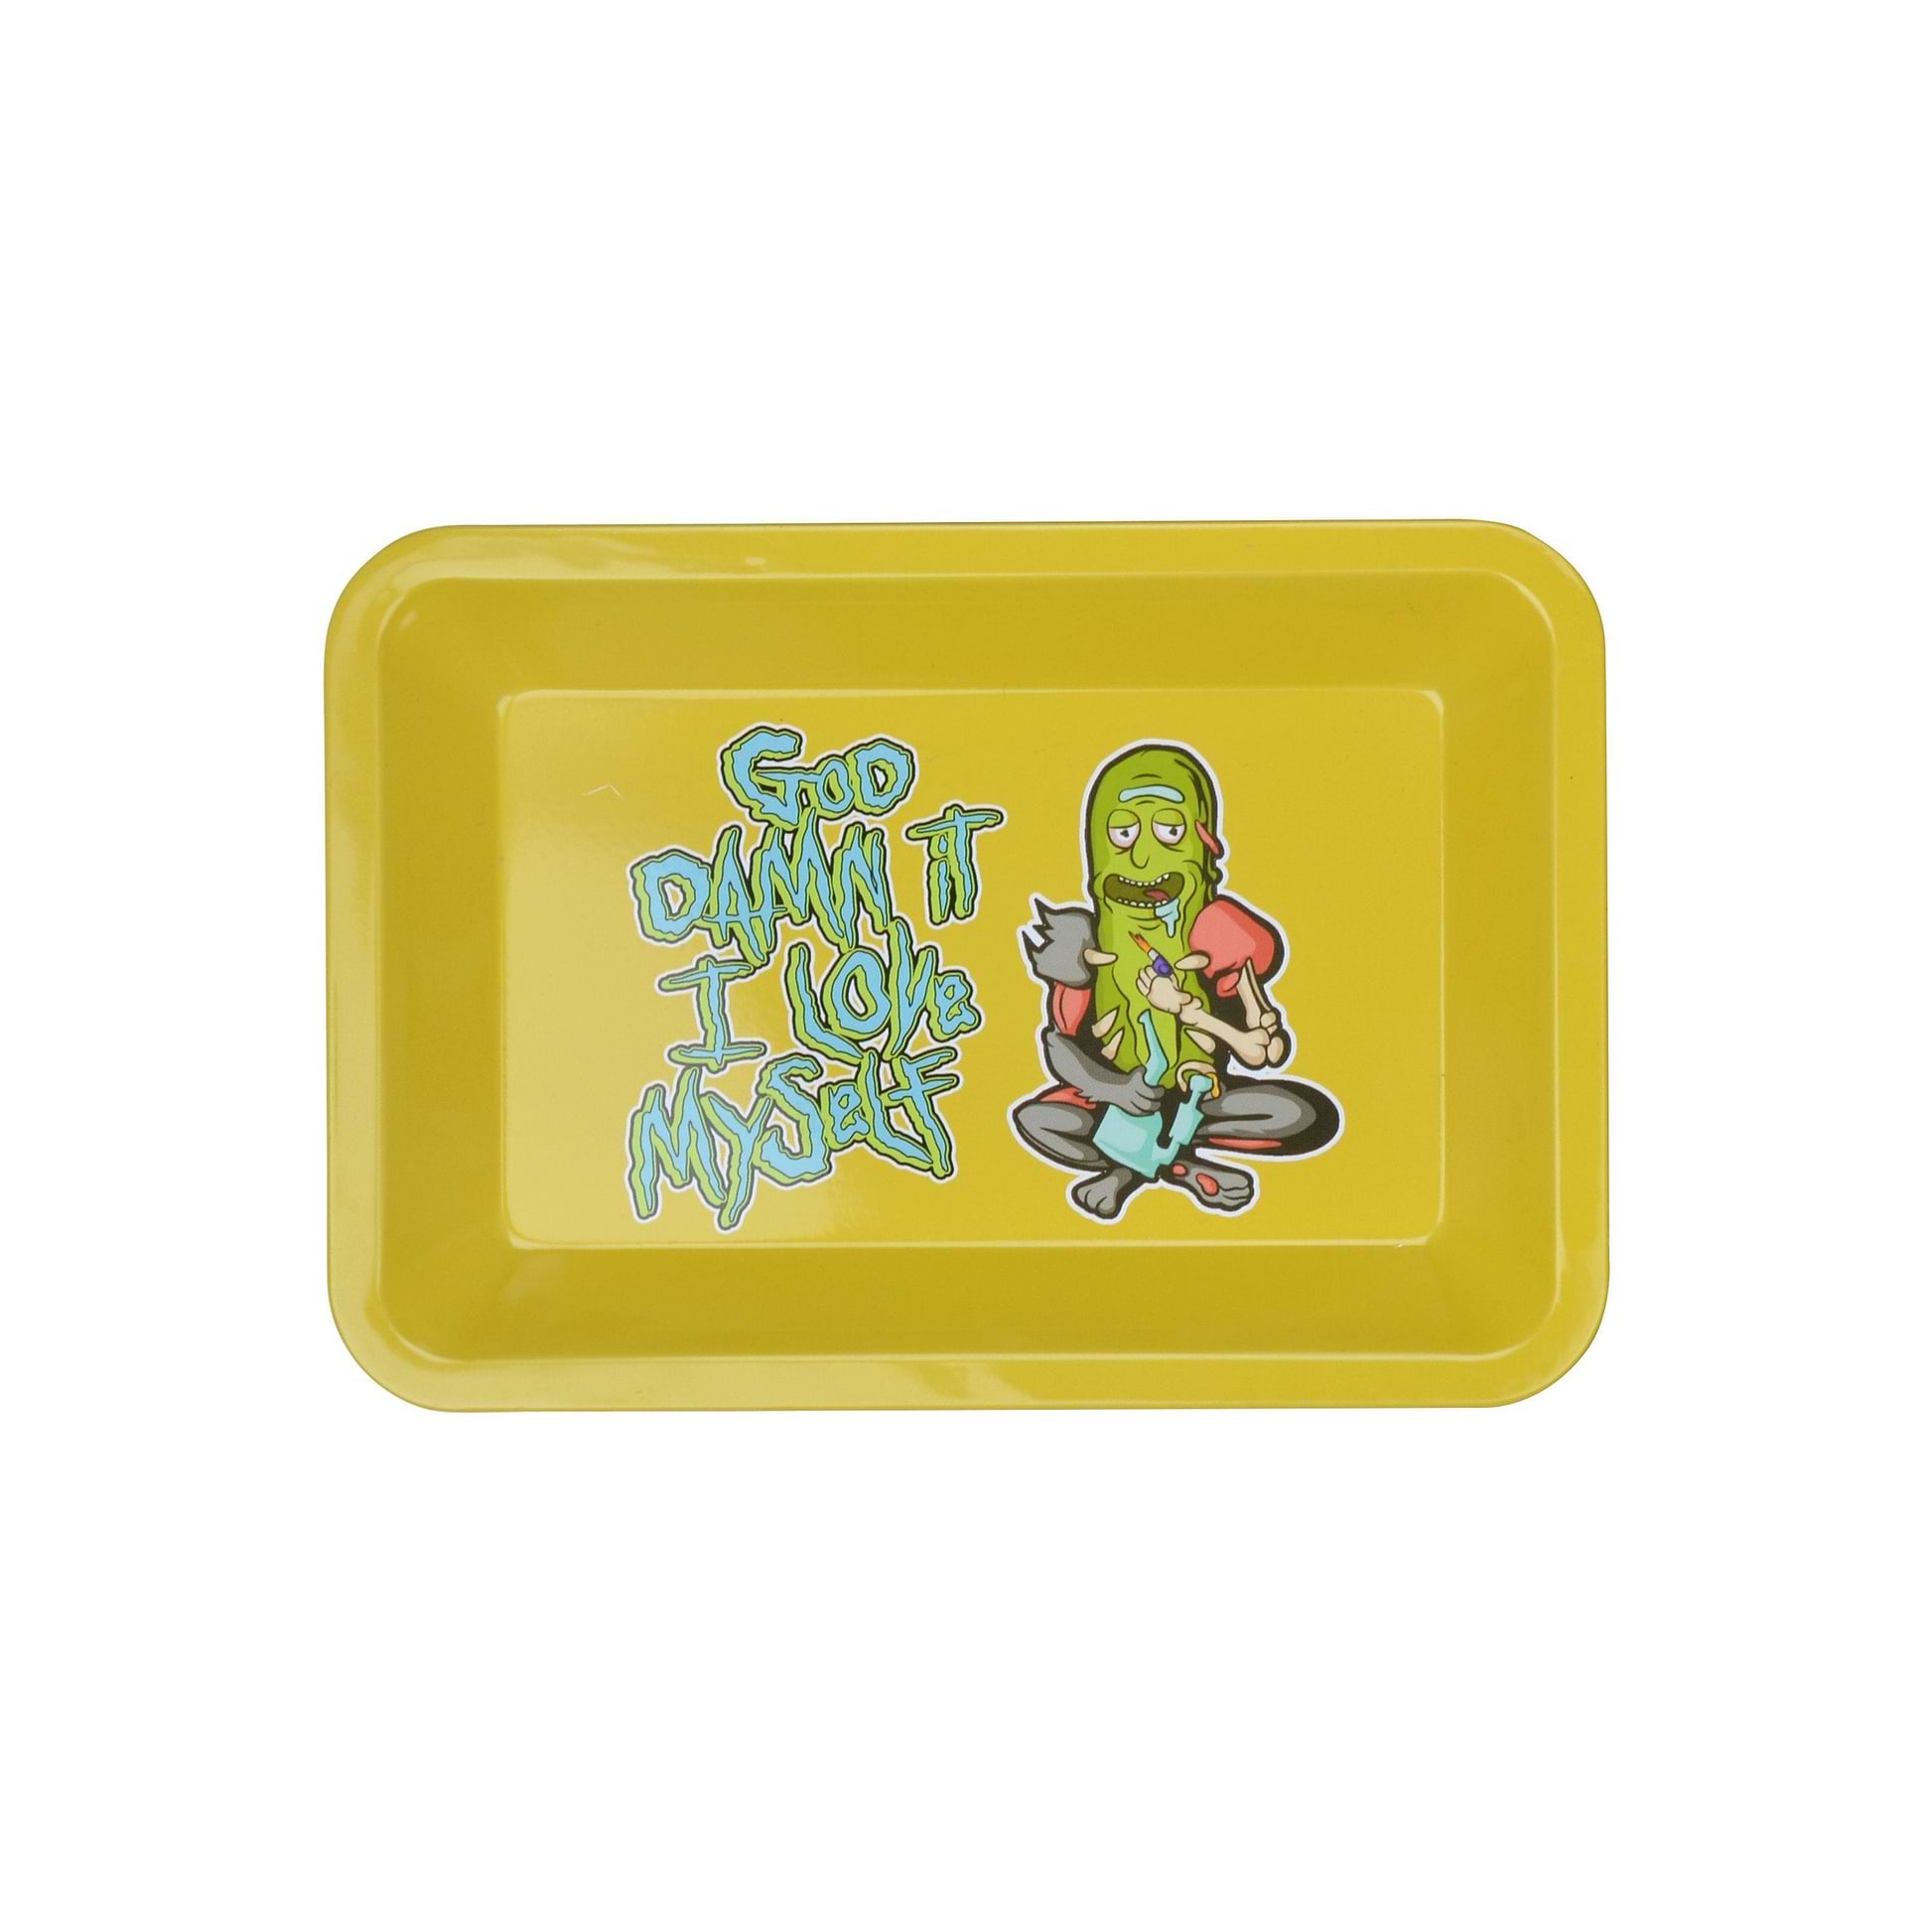 Yellow rectangle rolling tray with God damn i love myself words on the left of pickle rick person drawing